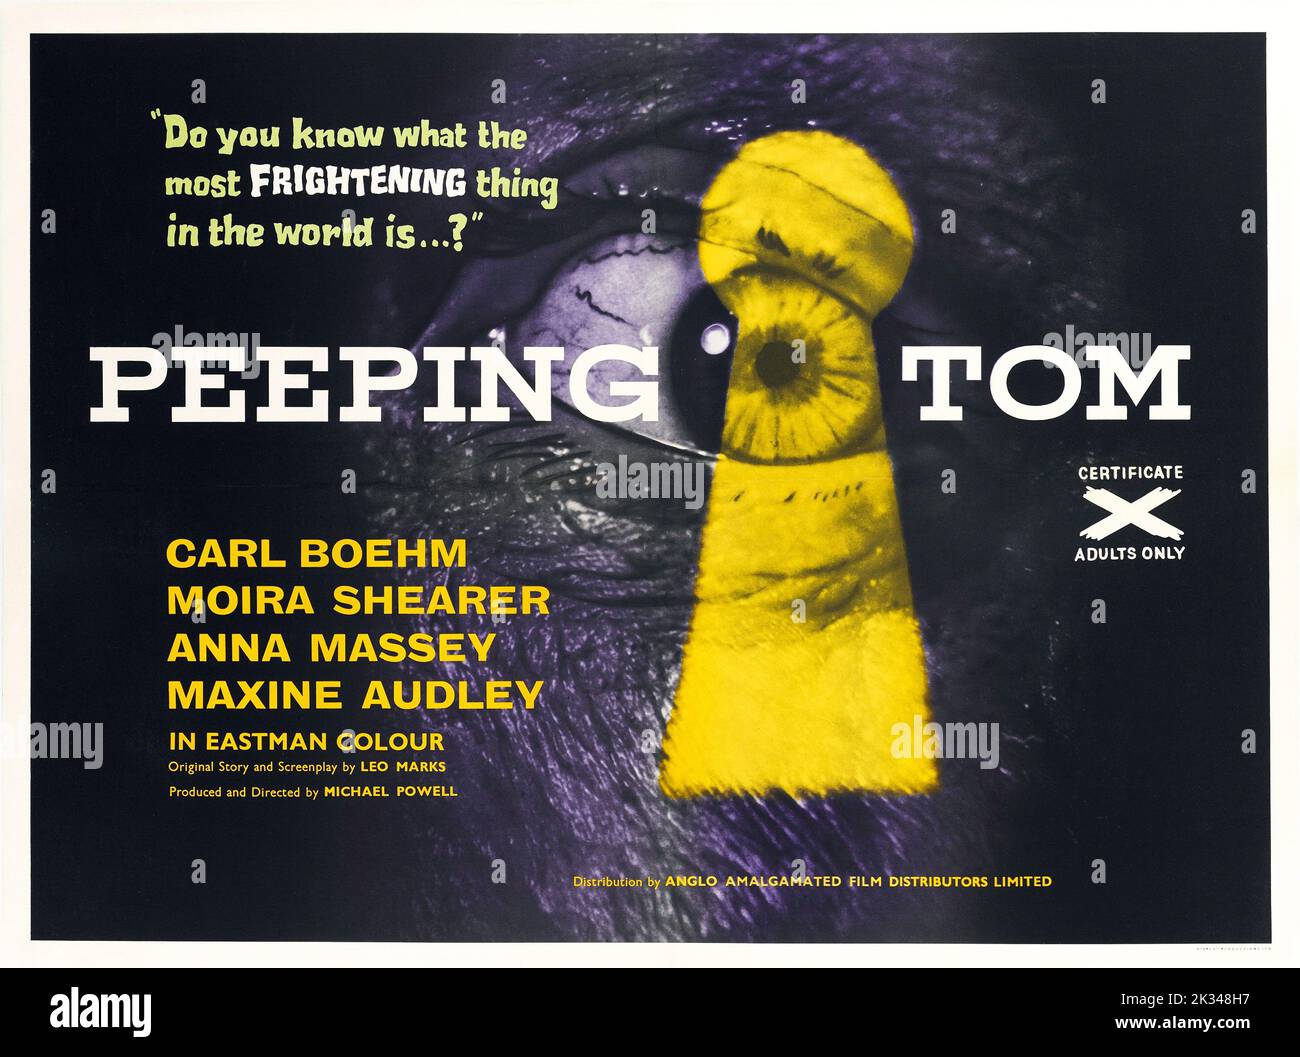 Vintage Film Poster - Peeping Tom is a 1960 British psychological horror-thriller directed by Michael Powell, starring Carl Boehm, Anna Massey, Stock Photo